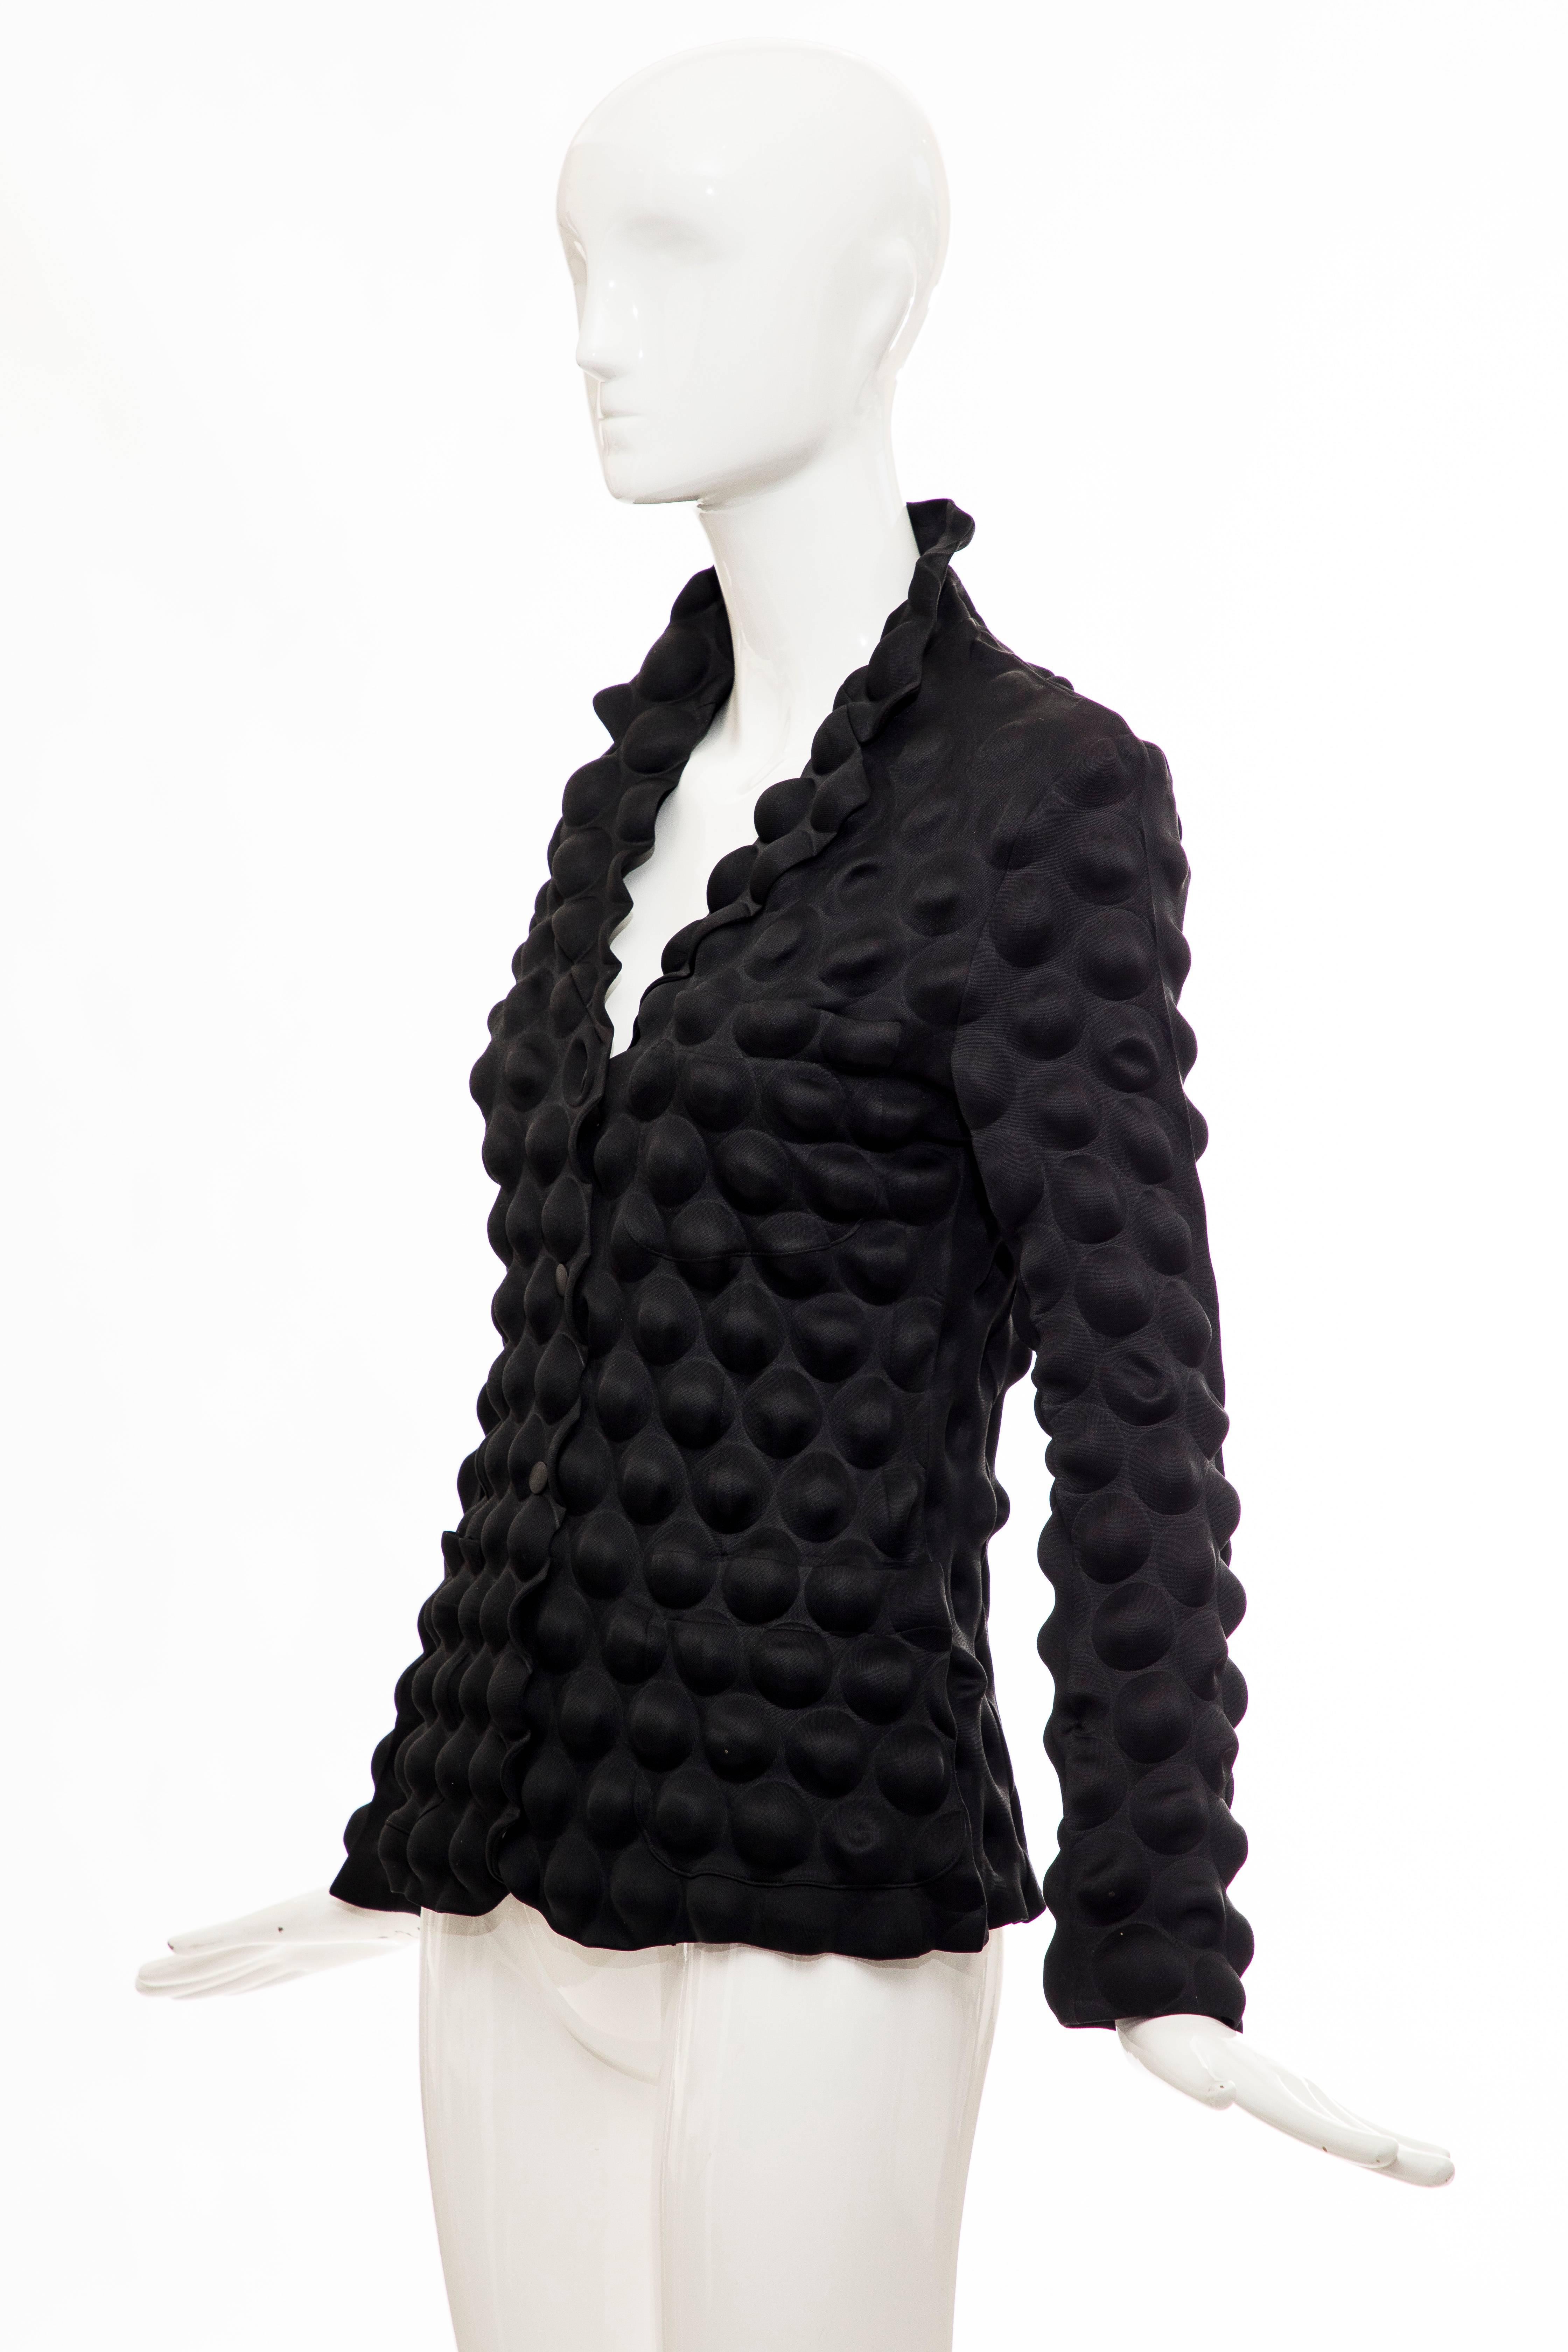 Issey Miyake Black Egg Carton Snap Front Blazer, Fall 2000 For Sale 4